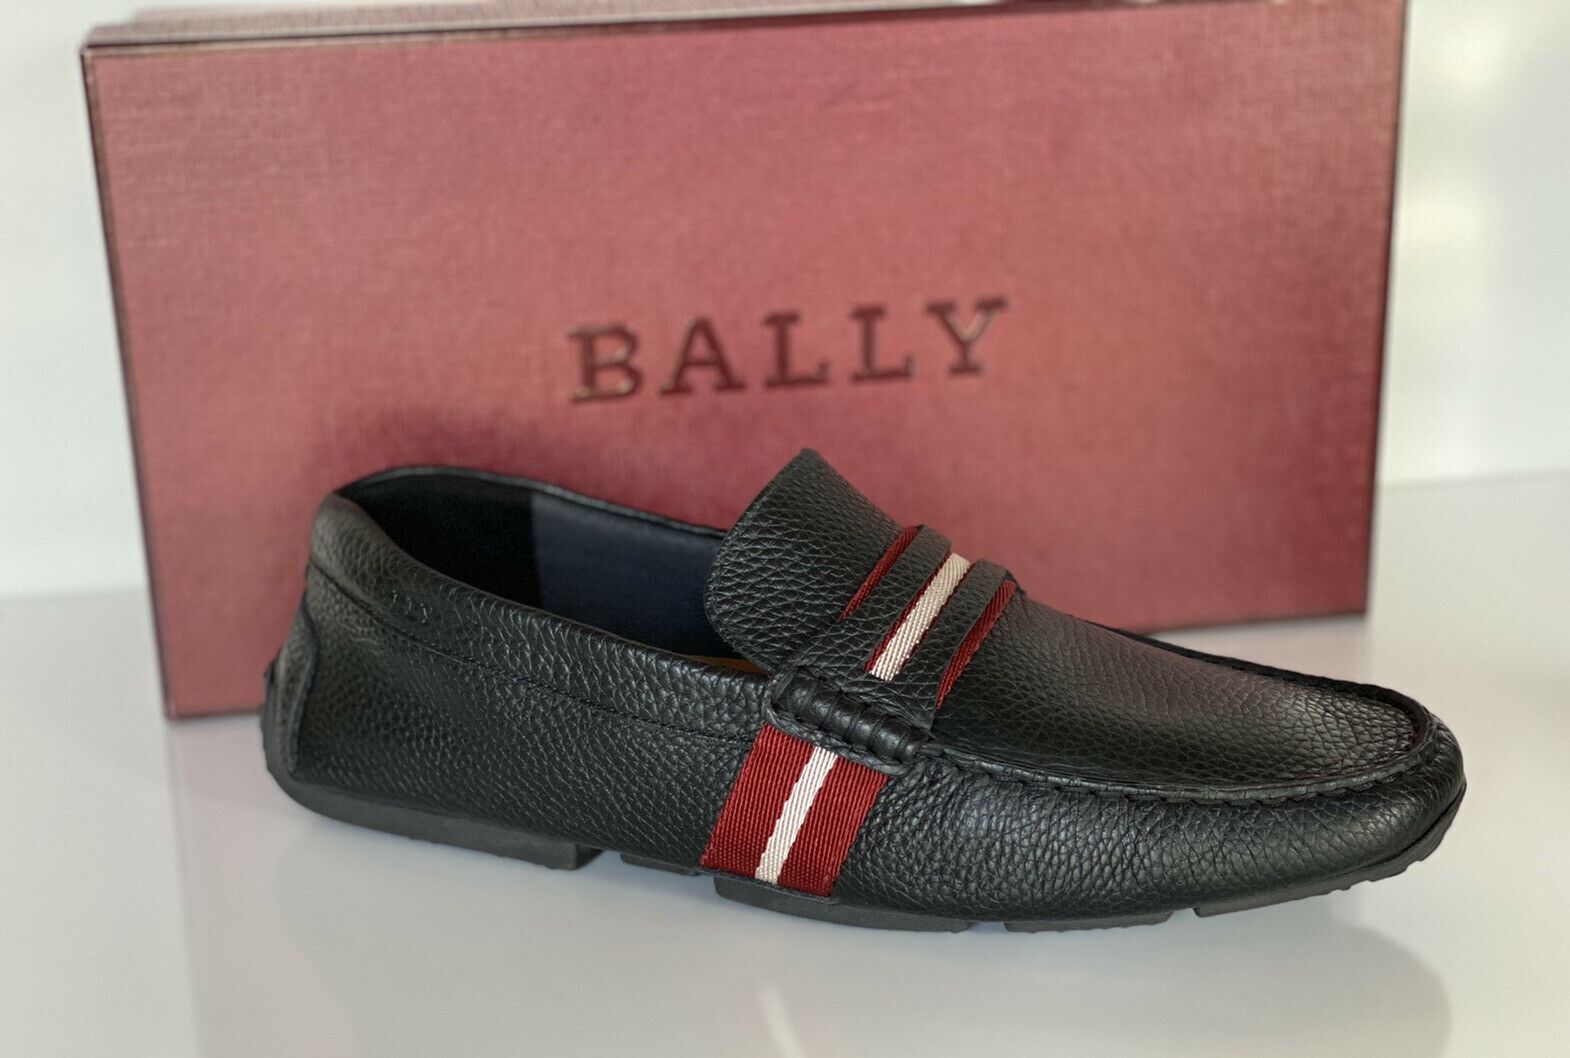 NIB Bally Mens Bovine Grained Leather Driver Shoes Black 11 D US 6228298 Italy